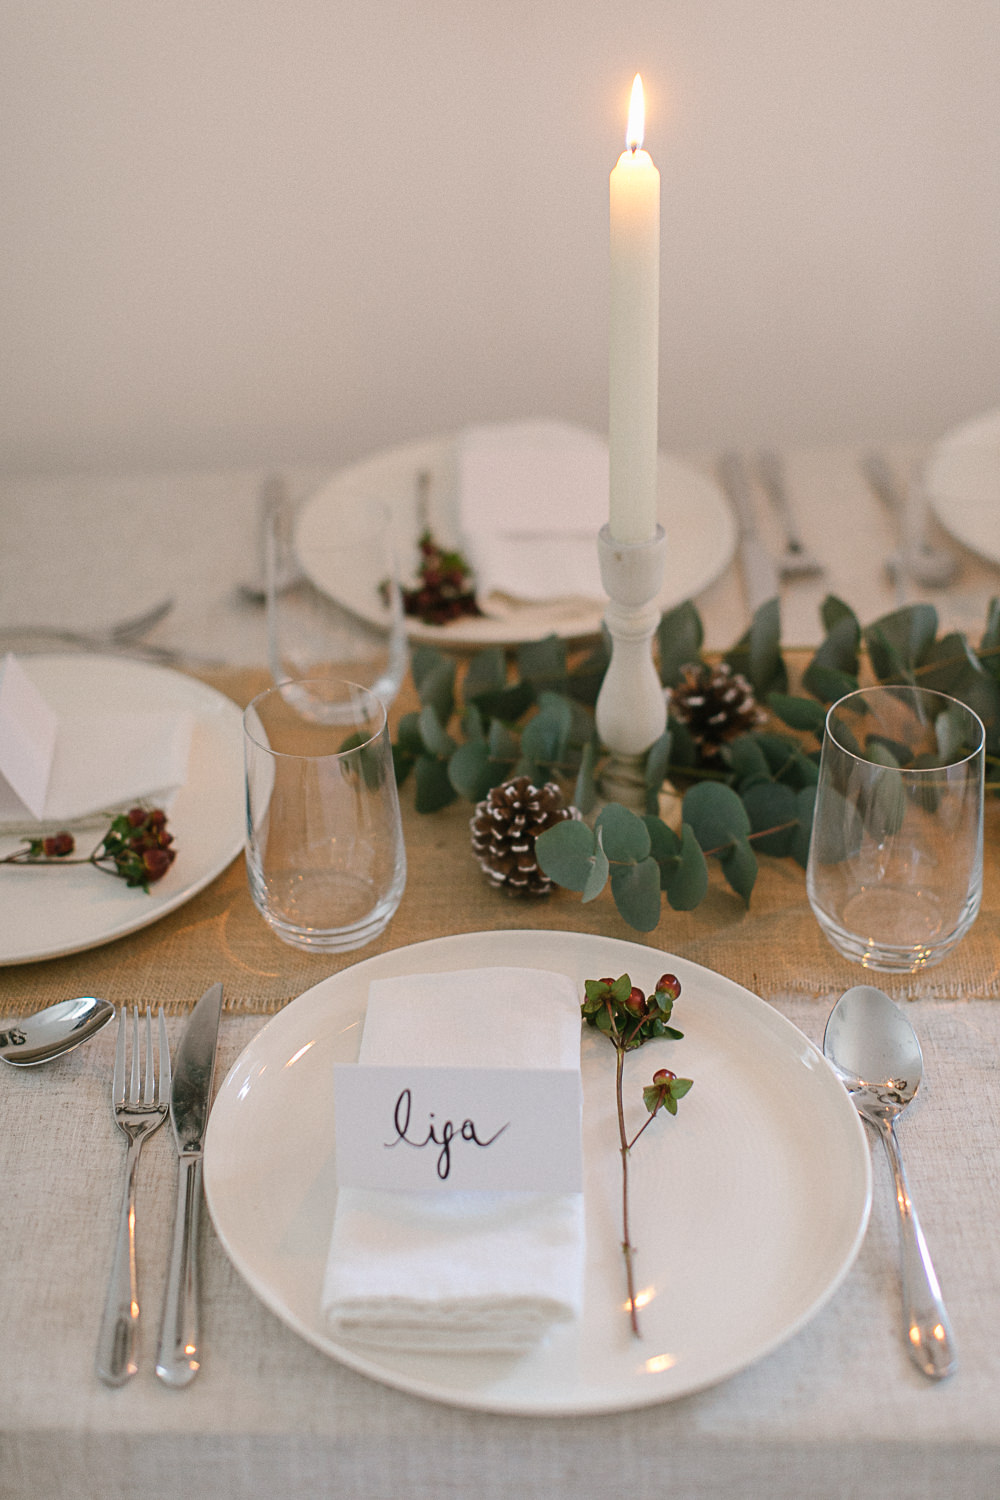 Christmas tablescape with red berries and eucalyptus